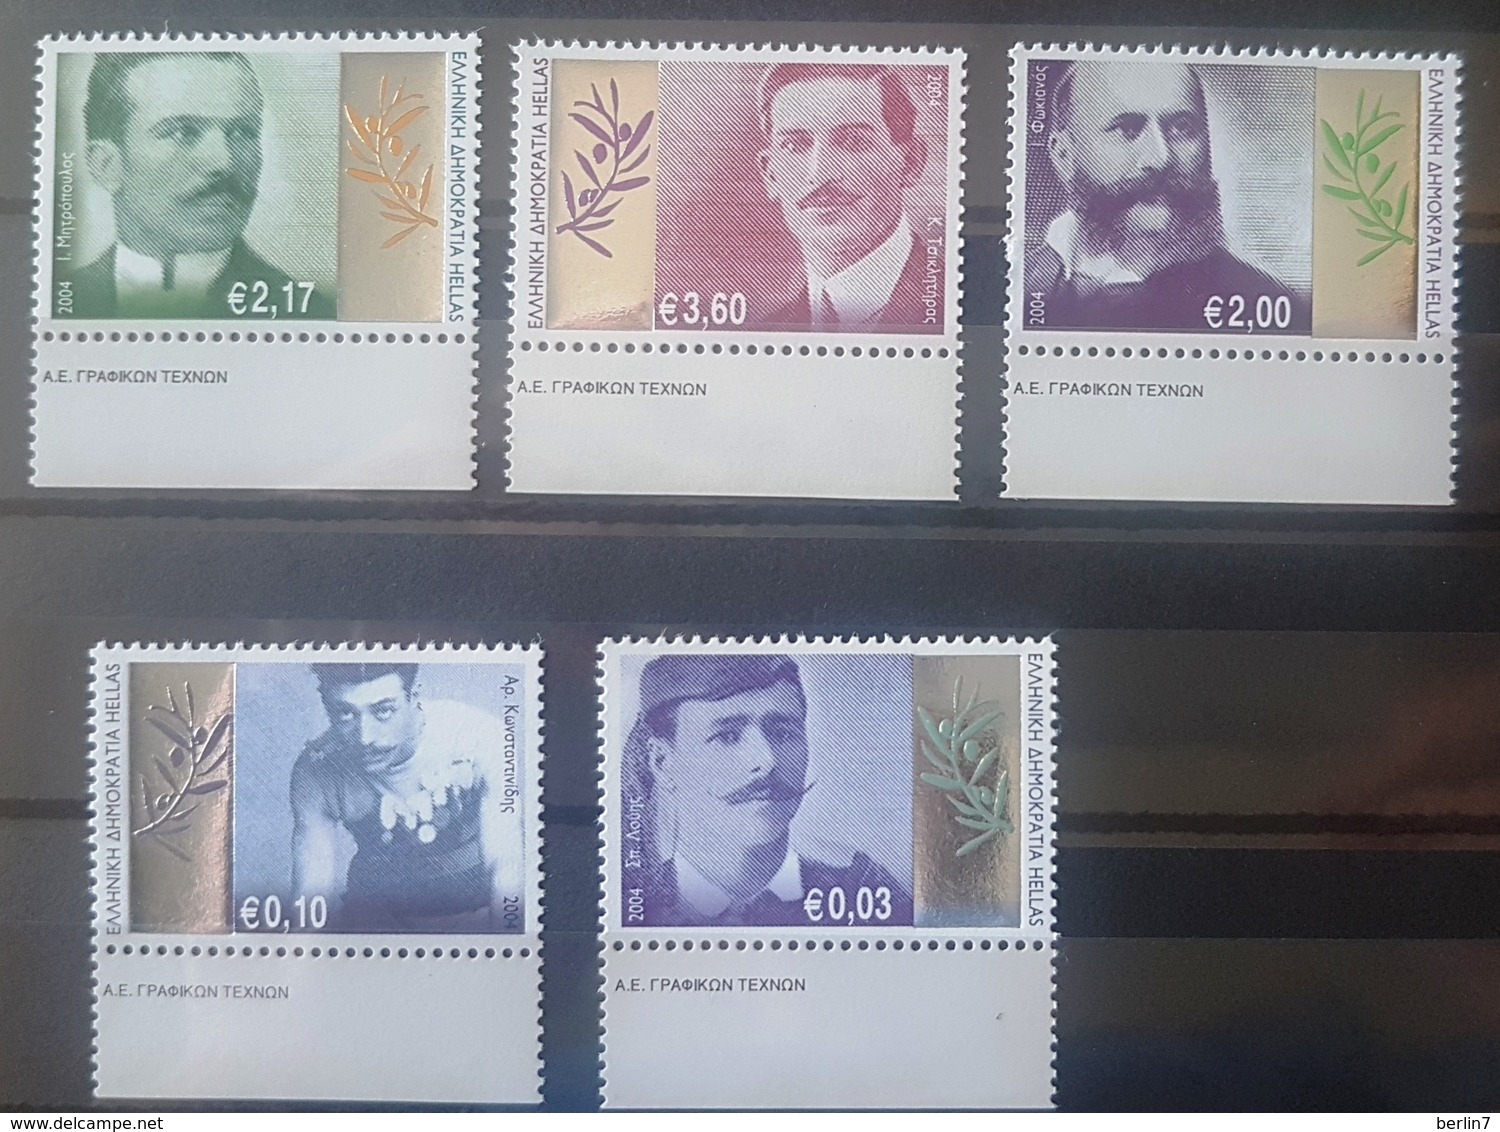 Greece 2004 Athens Olympic Games Olympic Champions Set, Margin Copies. MNH Selling Price Below Face Value - Summer 2004: Athens